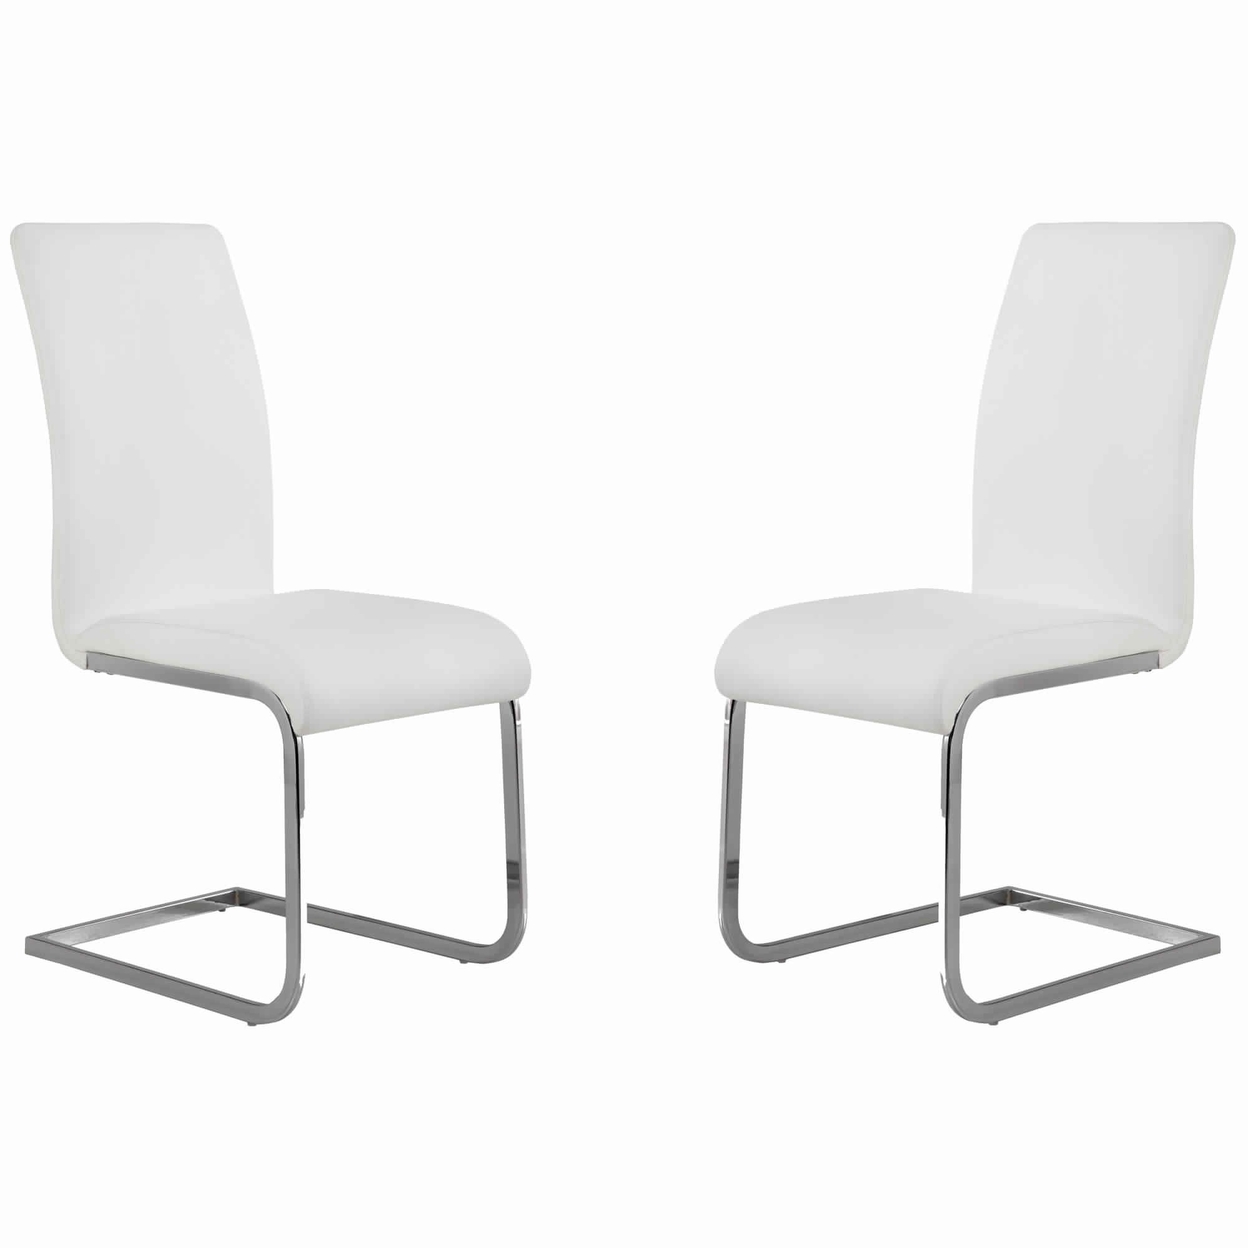 Metal Cantilever Base Leatherette Dining Chair, Set Of 2, White And Silver- Saltoro Sherpi